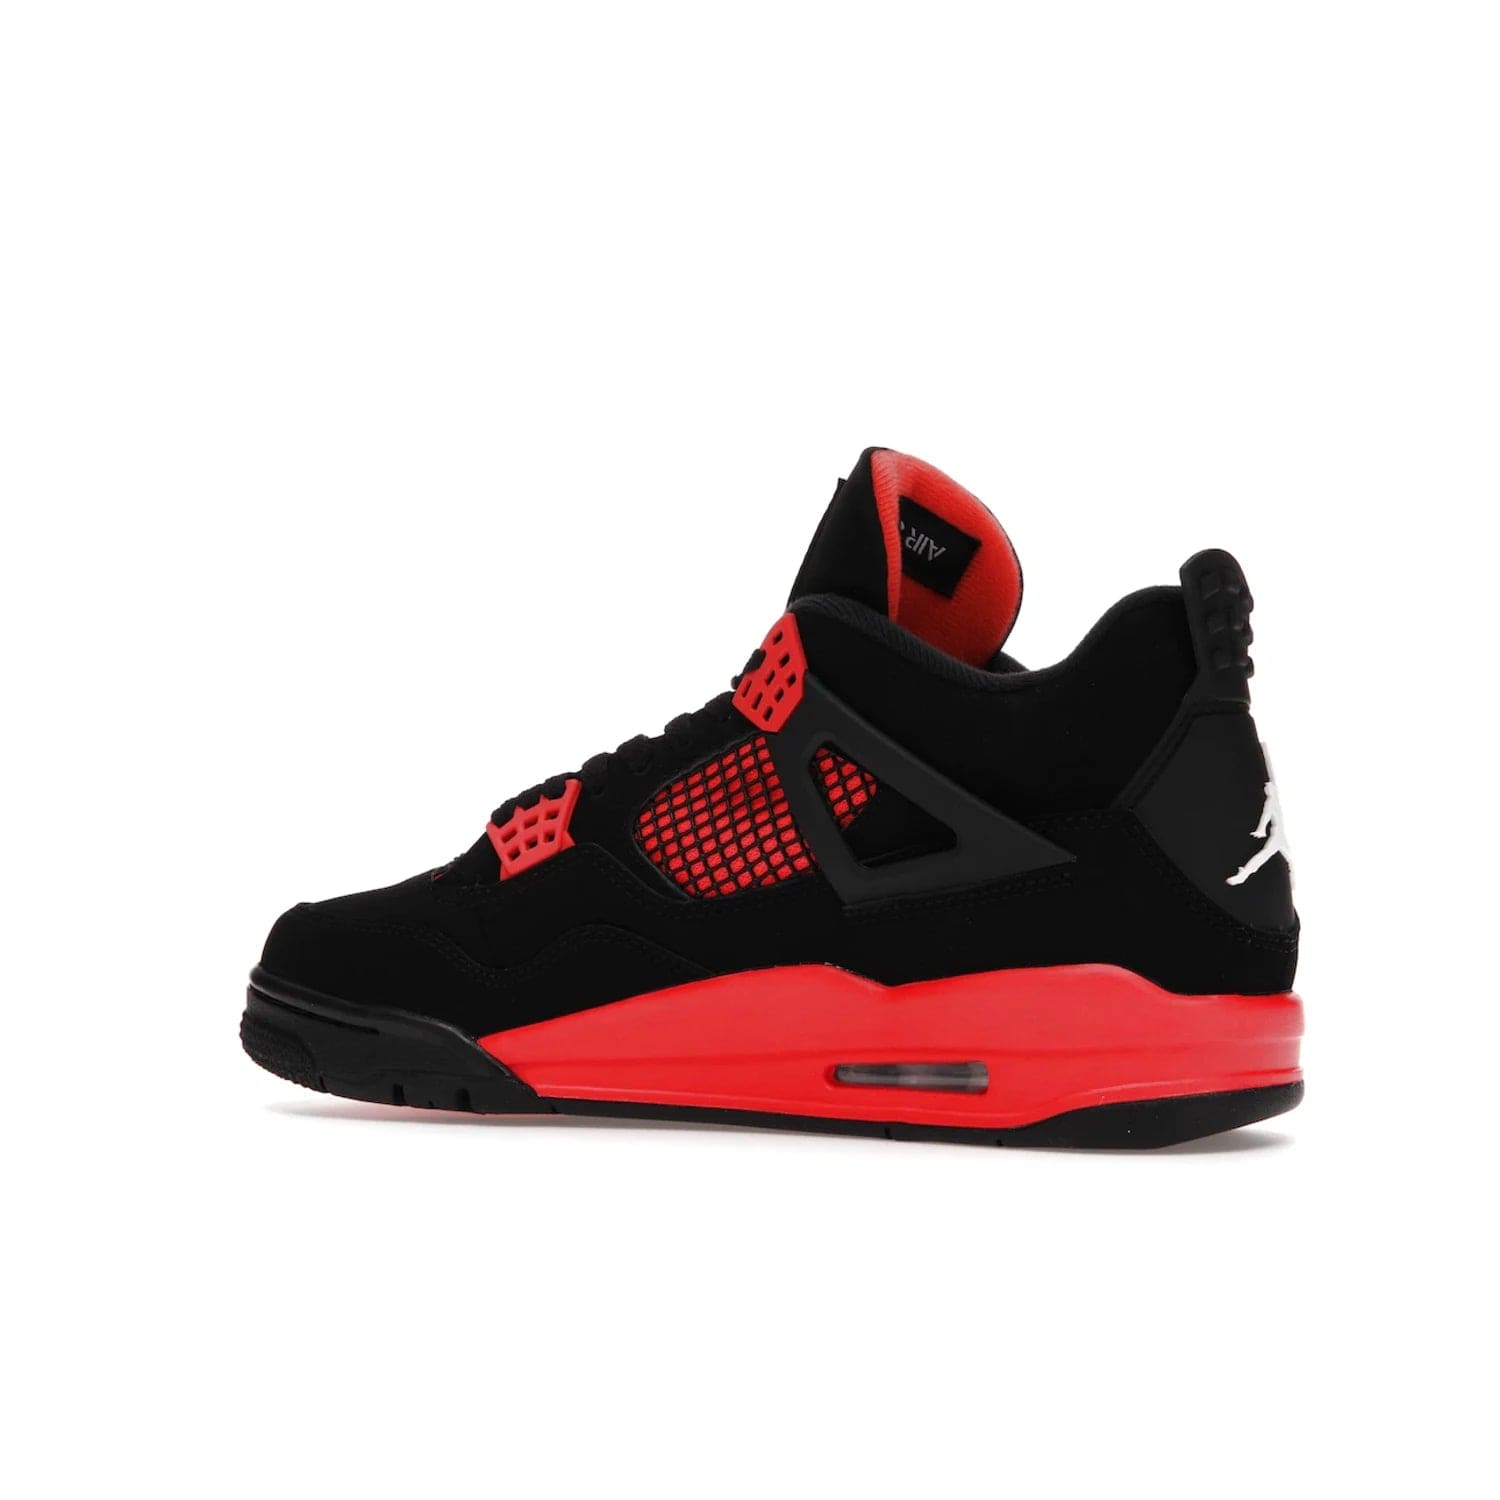 Jordan 4 Retro Red Thunder - Image 22 - Only at www.BallersClubKickz.com - Upscale your footwear with the Air Jordan 4 Retro Red Thunder. Featuring a Durabuck upper, red underlays, signature Flight patch, and vibrant red midsole, this retro sneaker adds style and edge. Releases in January 2022.